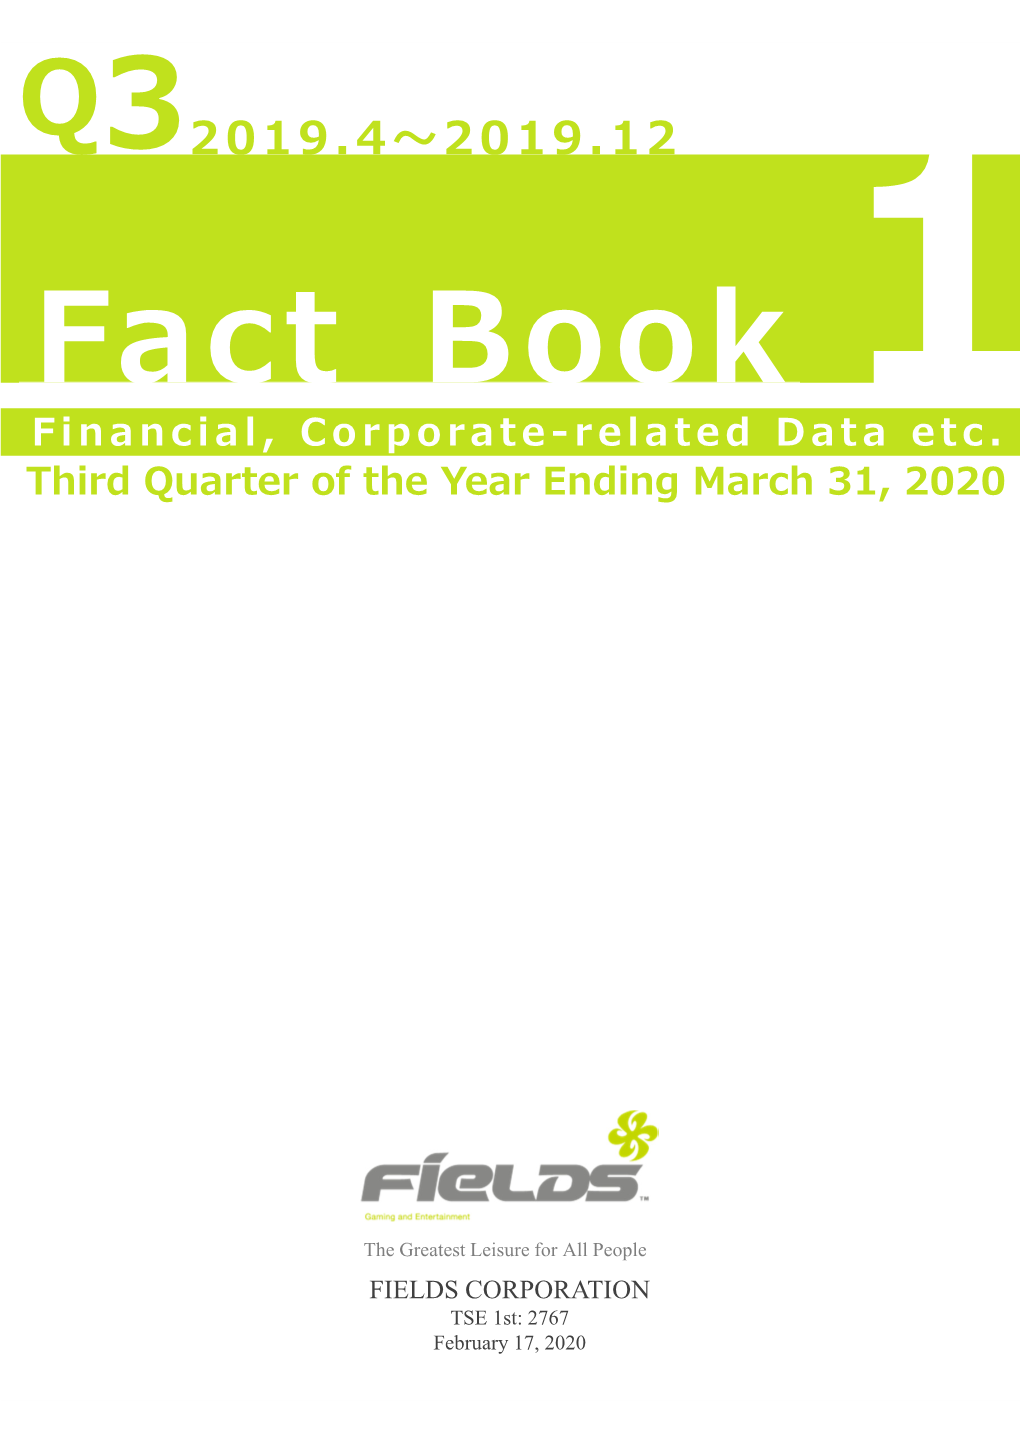 2019.4〜2019.12 Fact Book Financial, Corporate-Related Data Etc